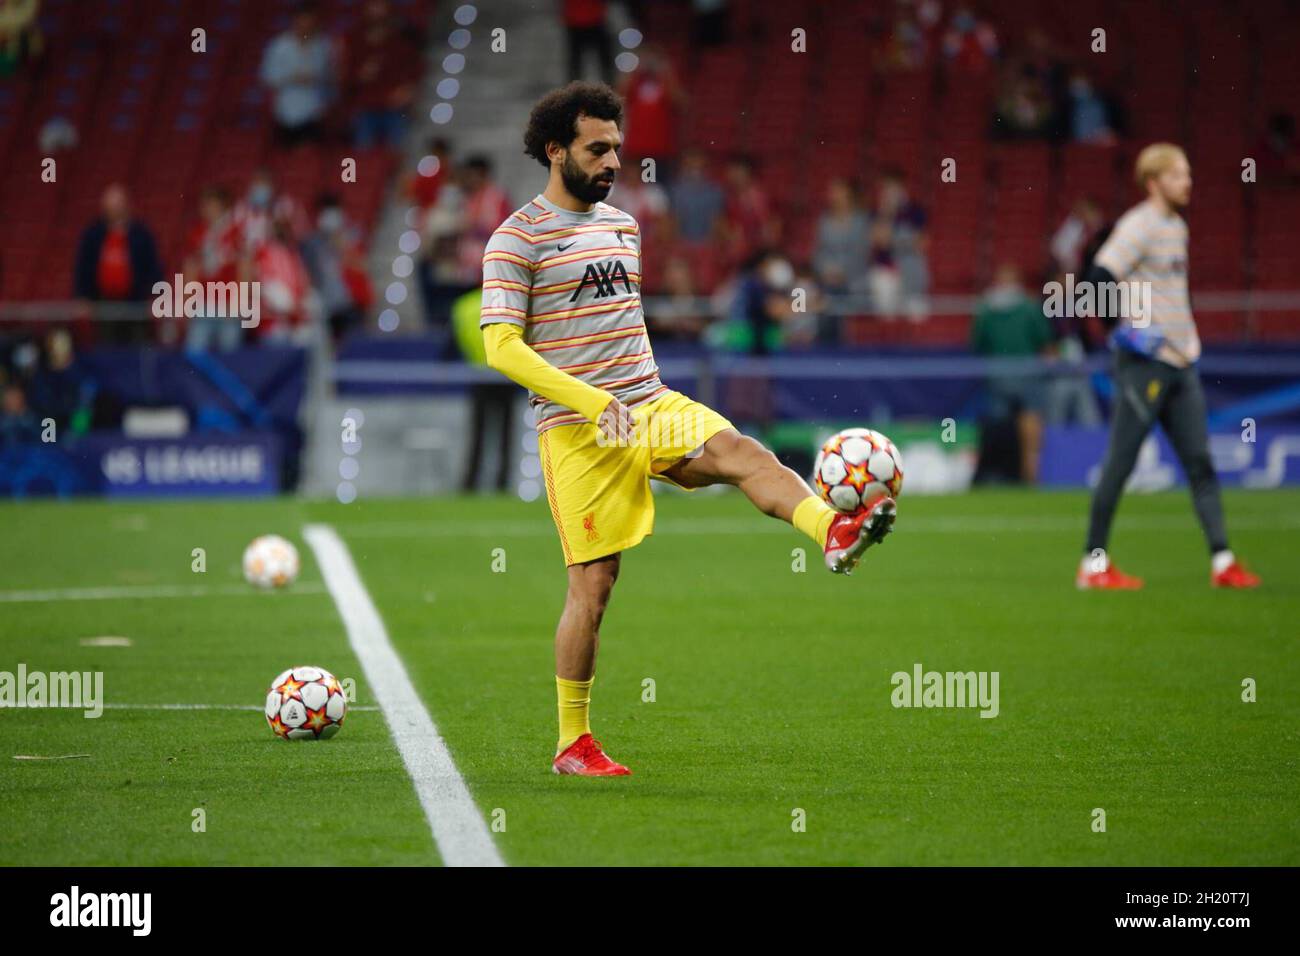 Madrid, Spain. 19th Oct, 2021. Mohamed Salah from Liverpool FC, during warming-up the UEFA Champions League Group stage agains Atletico de Madrid at the Wanda Metropolitano stadium. (Photo by: Ivan Abanades Medina Credit: CORDON PRESS/Alamy Live News Stock Photo